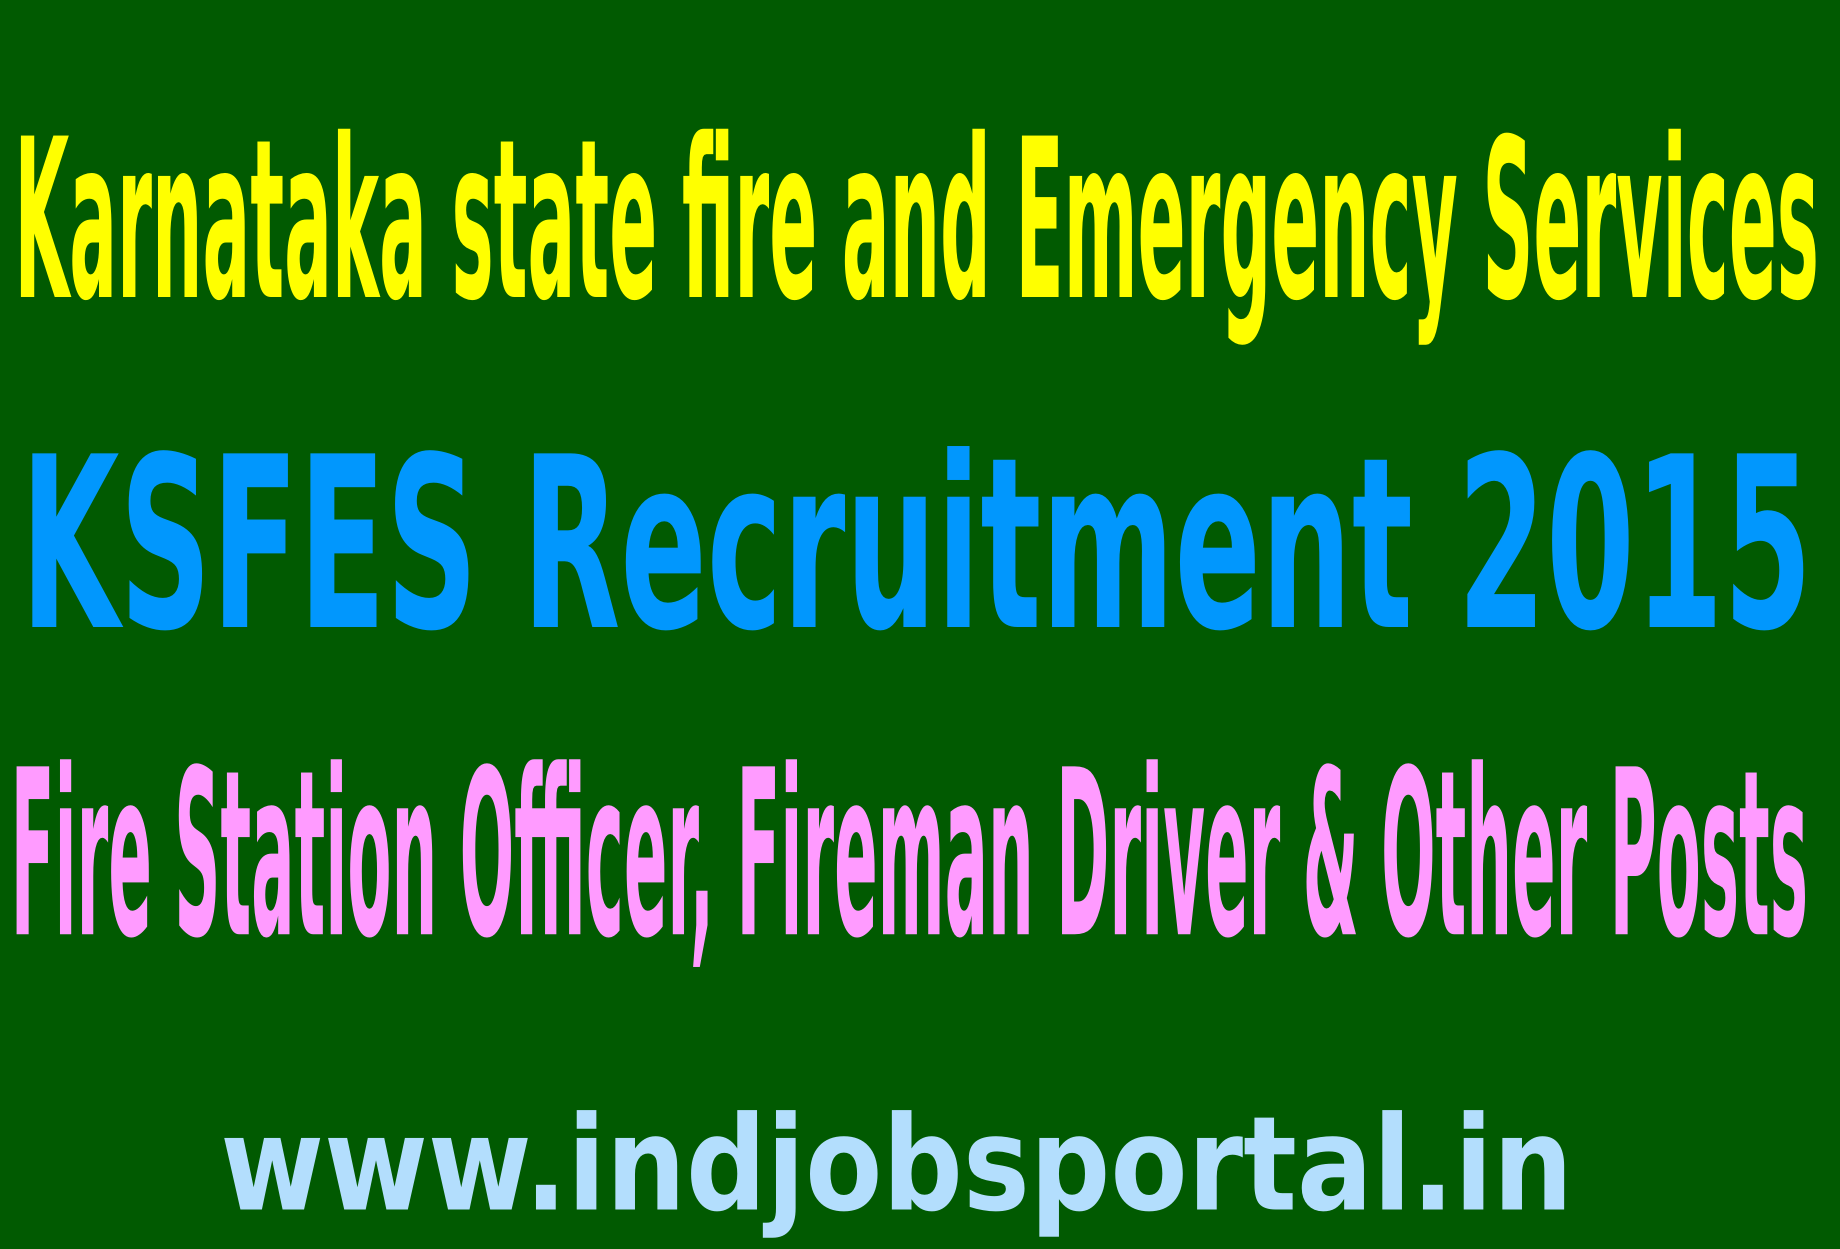 KSFES Recruitment 2015 Online Application For 1859 Fire Station Officer, Fireman Driver & Other Posts